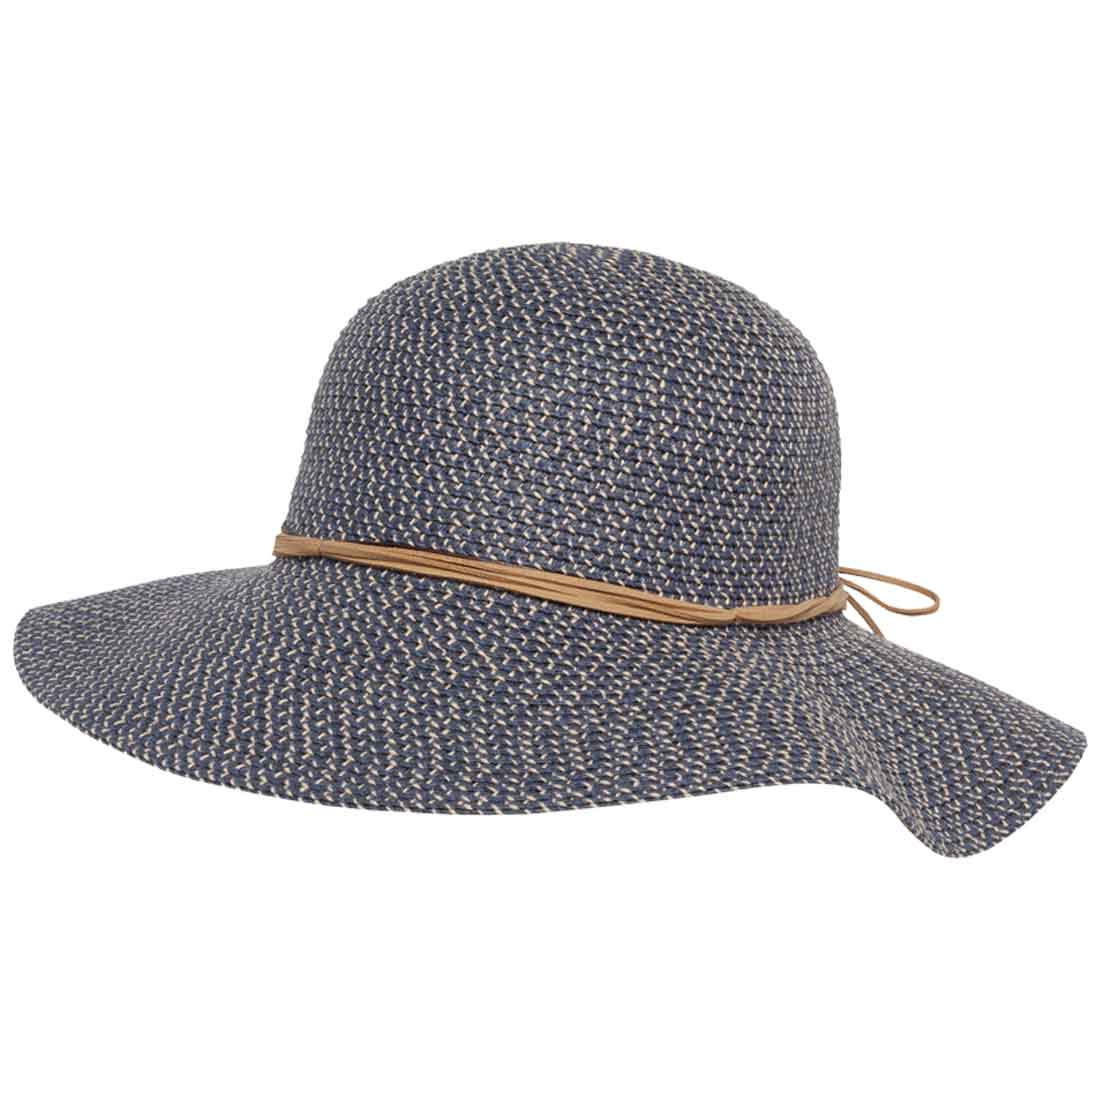 Sunday Afternoons Sol Seeker Hat - Women's